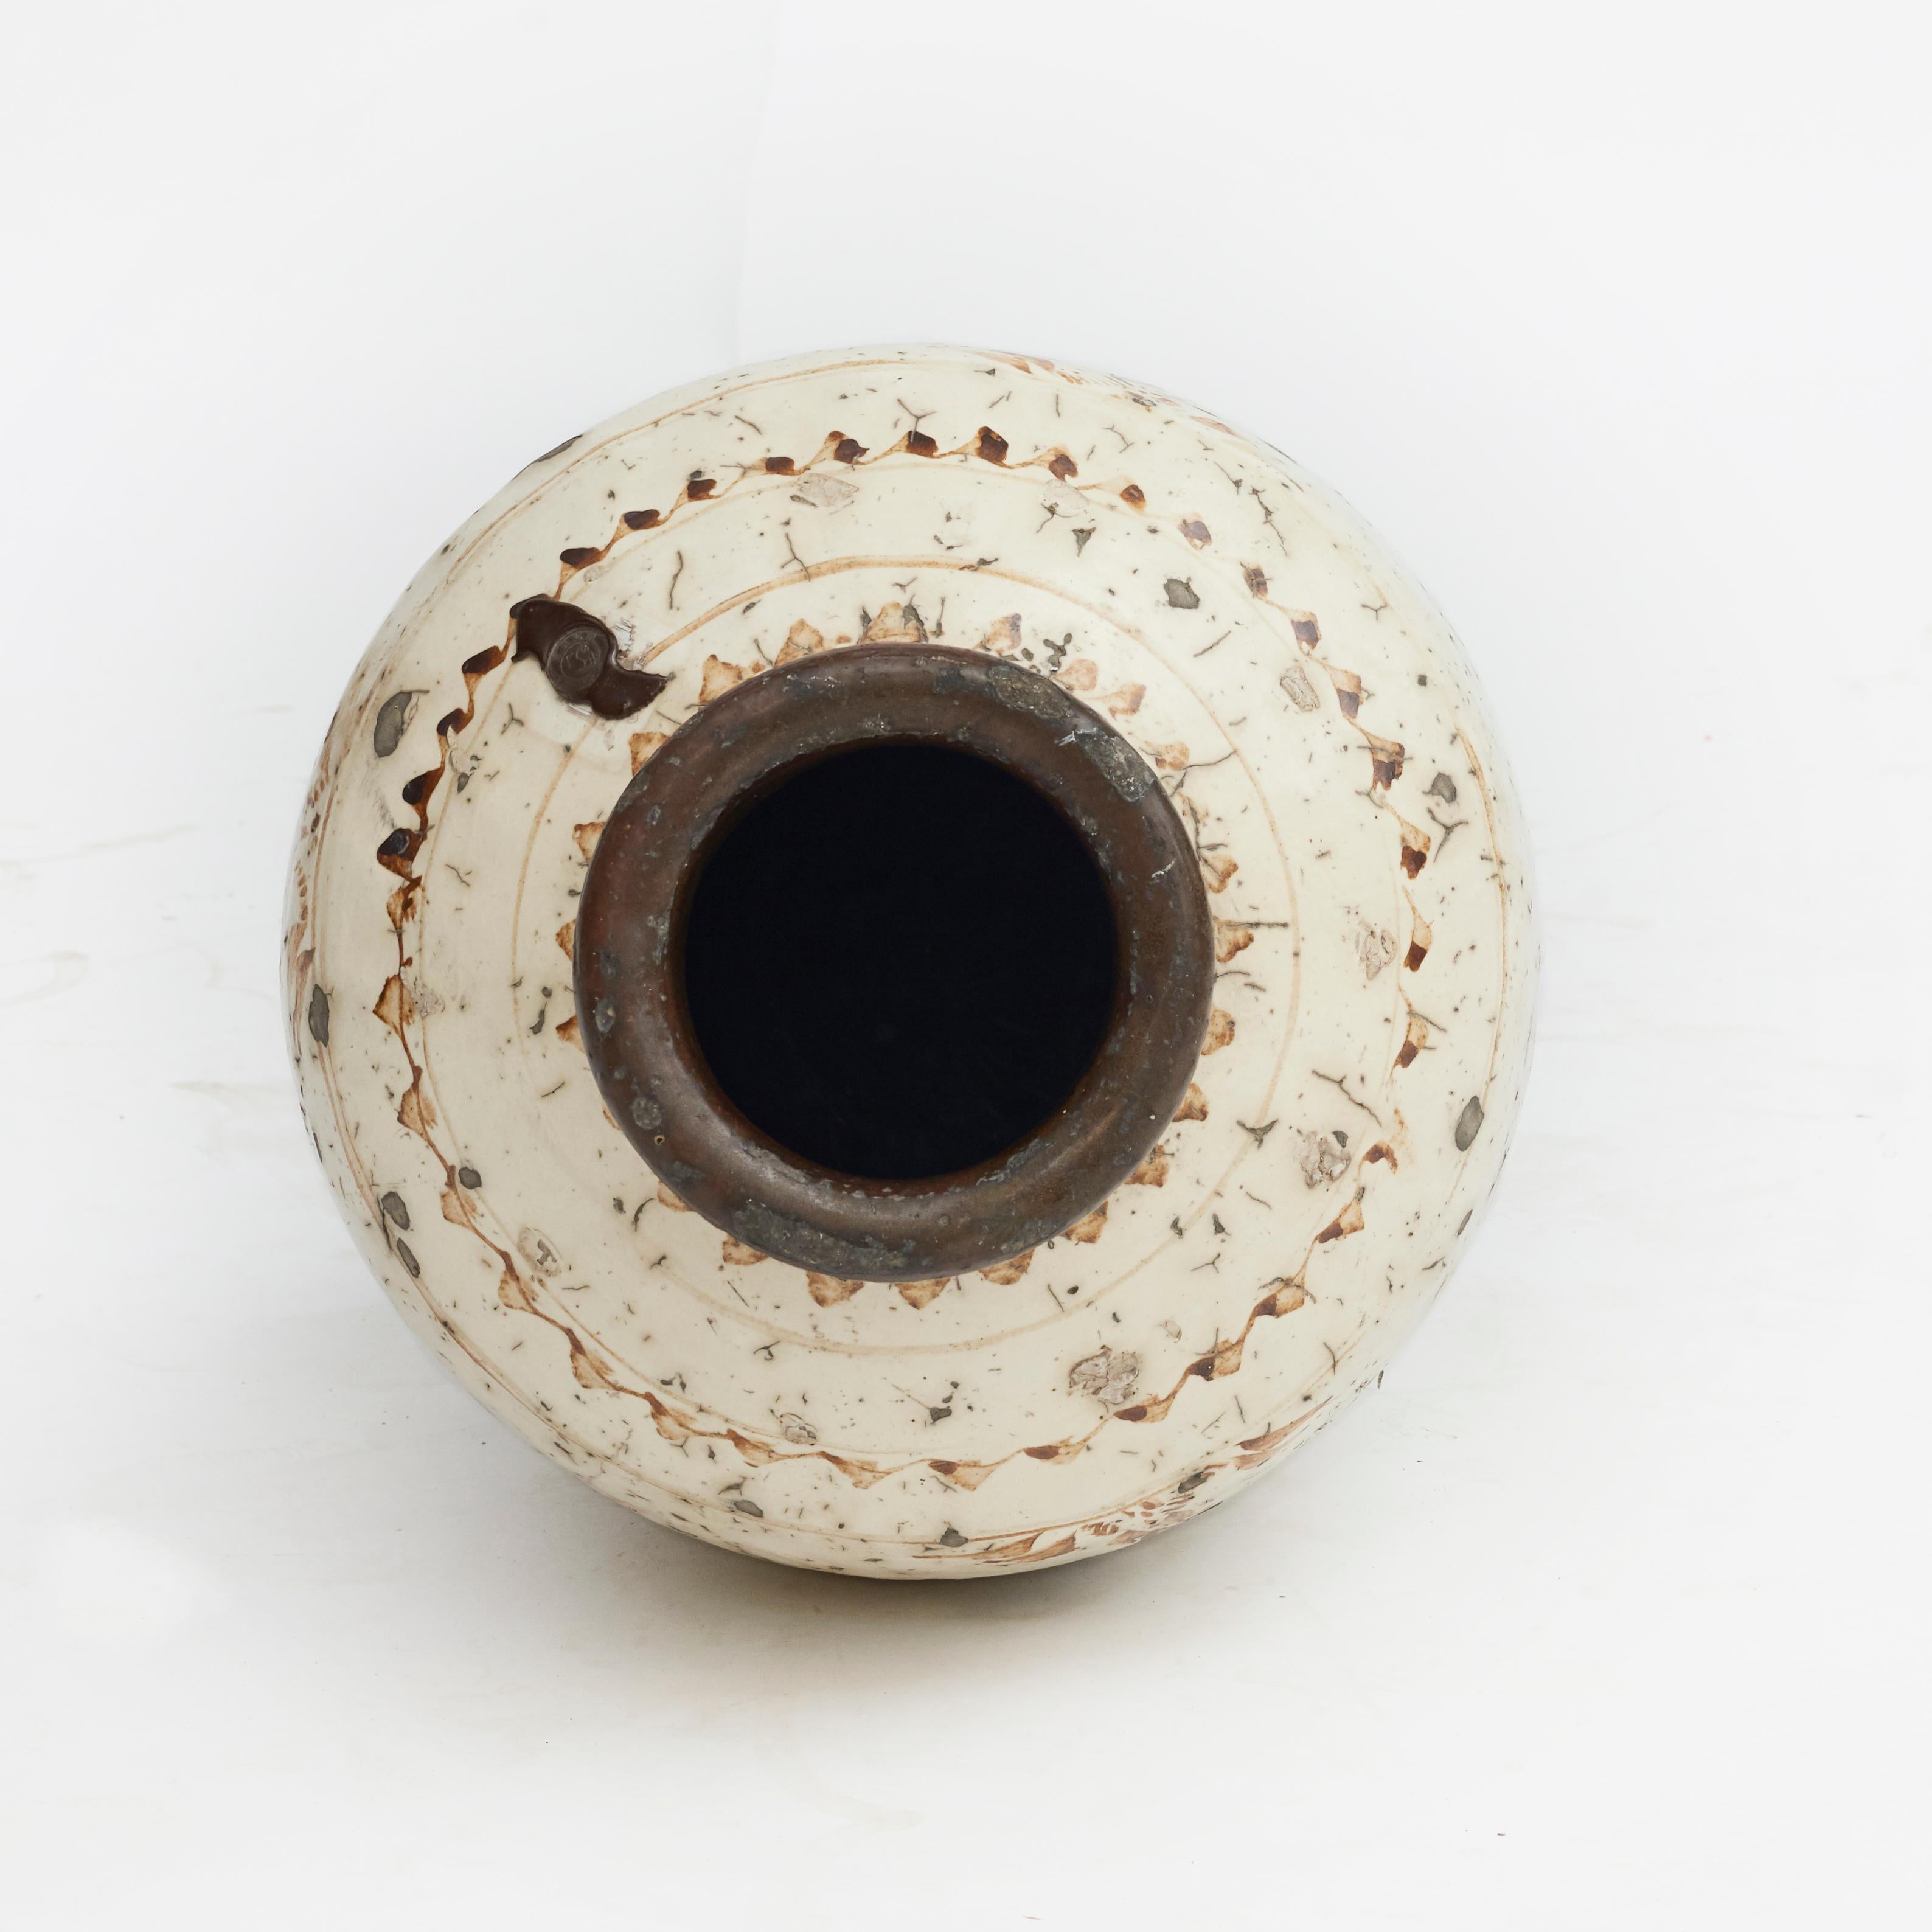 Hand potted Cizhou stoneware vessel, dating to the Ming dynasty, 17th century. Measure : Height: 54 cm.
Traditional urn-shaped stoneware, hand decorated in typical earth-tone Chinese brushwork on a light cream background.